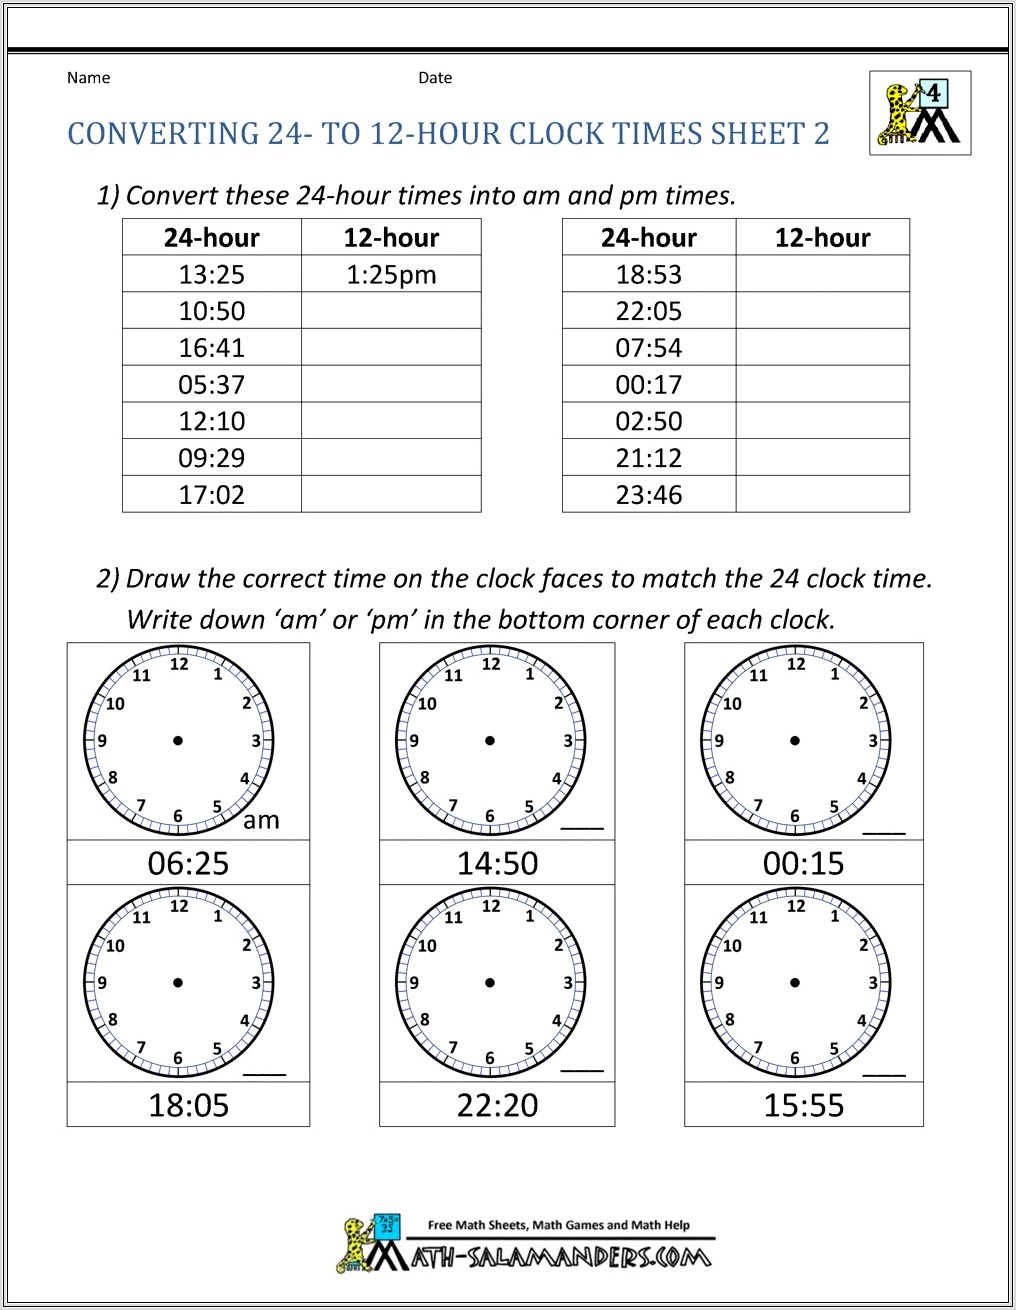 Difference Between 2 Times Worksheet Ks2